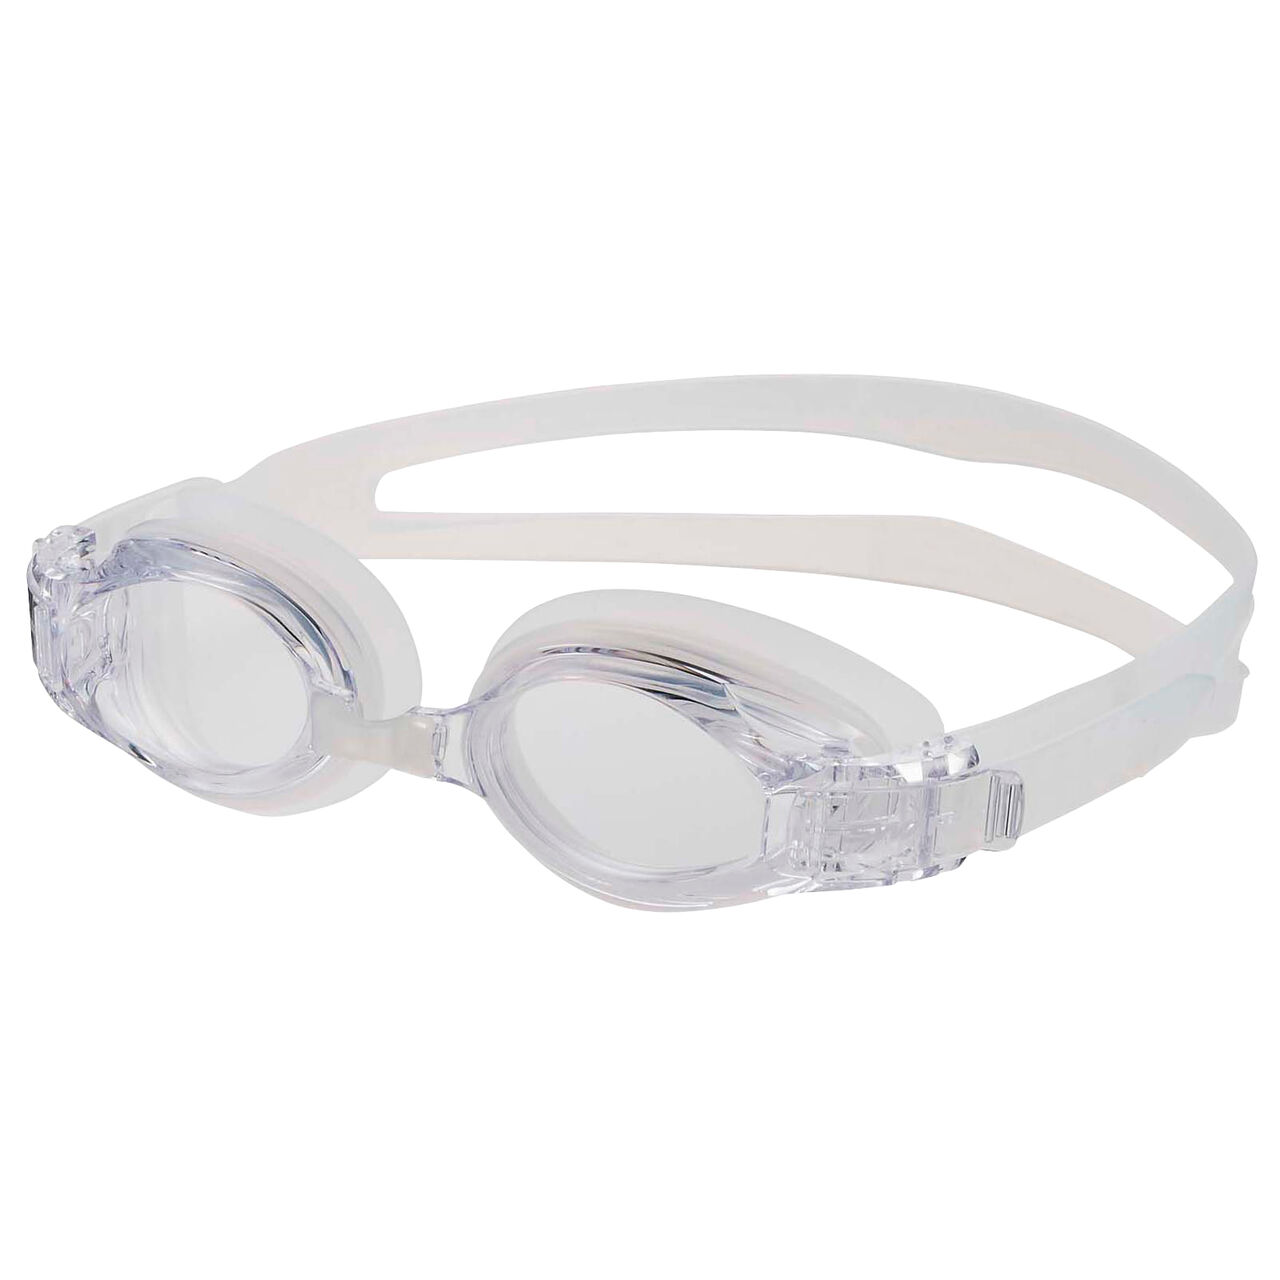 SWANS SW-34 CLA Clear Lens SWIM GOGGLE,Opt2, large image number 0